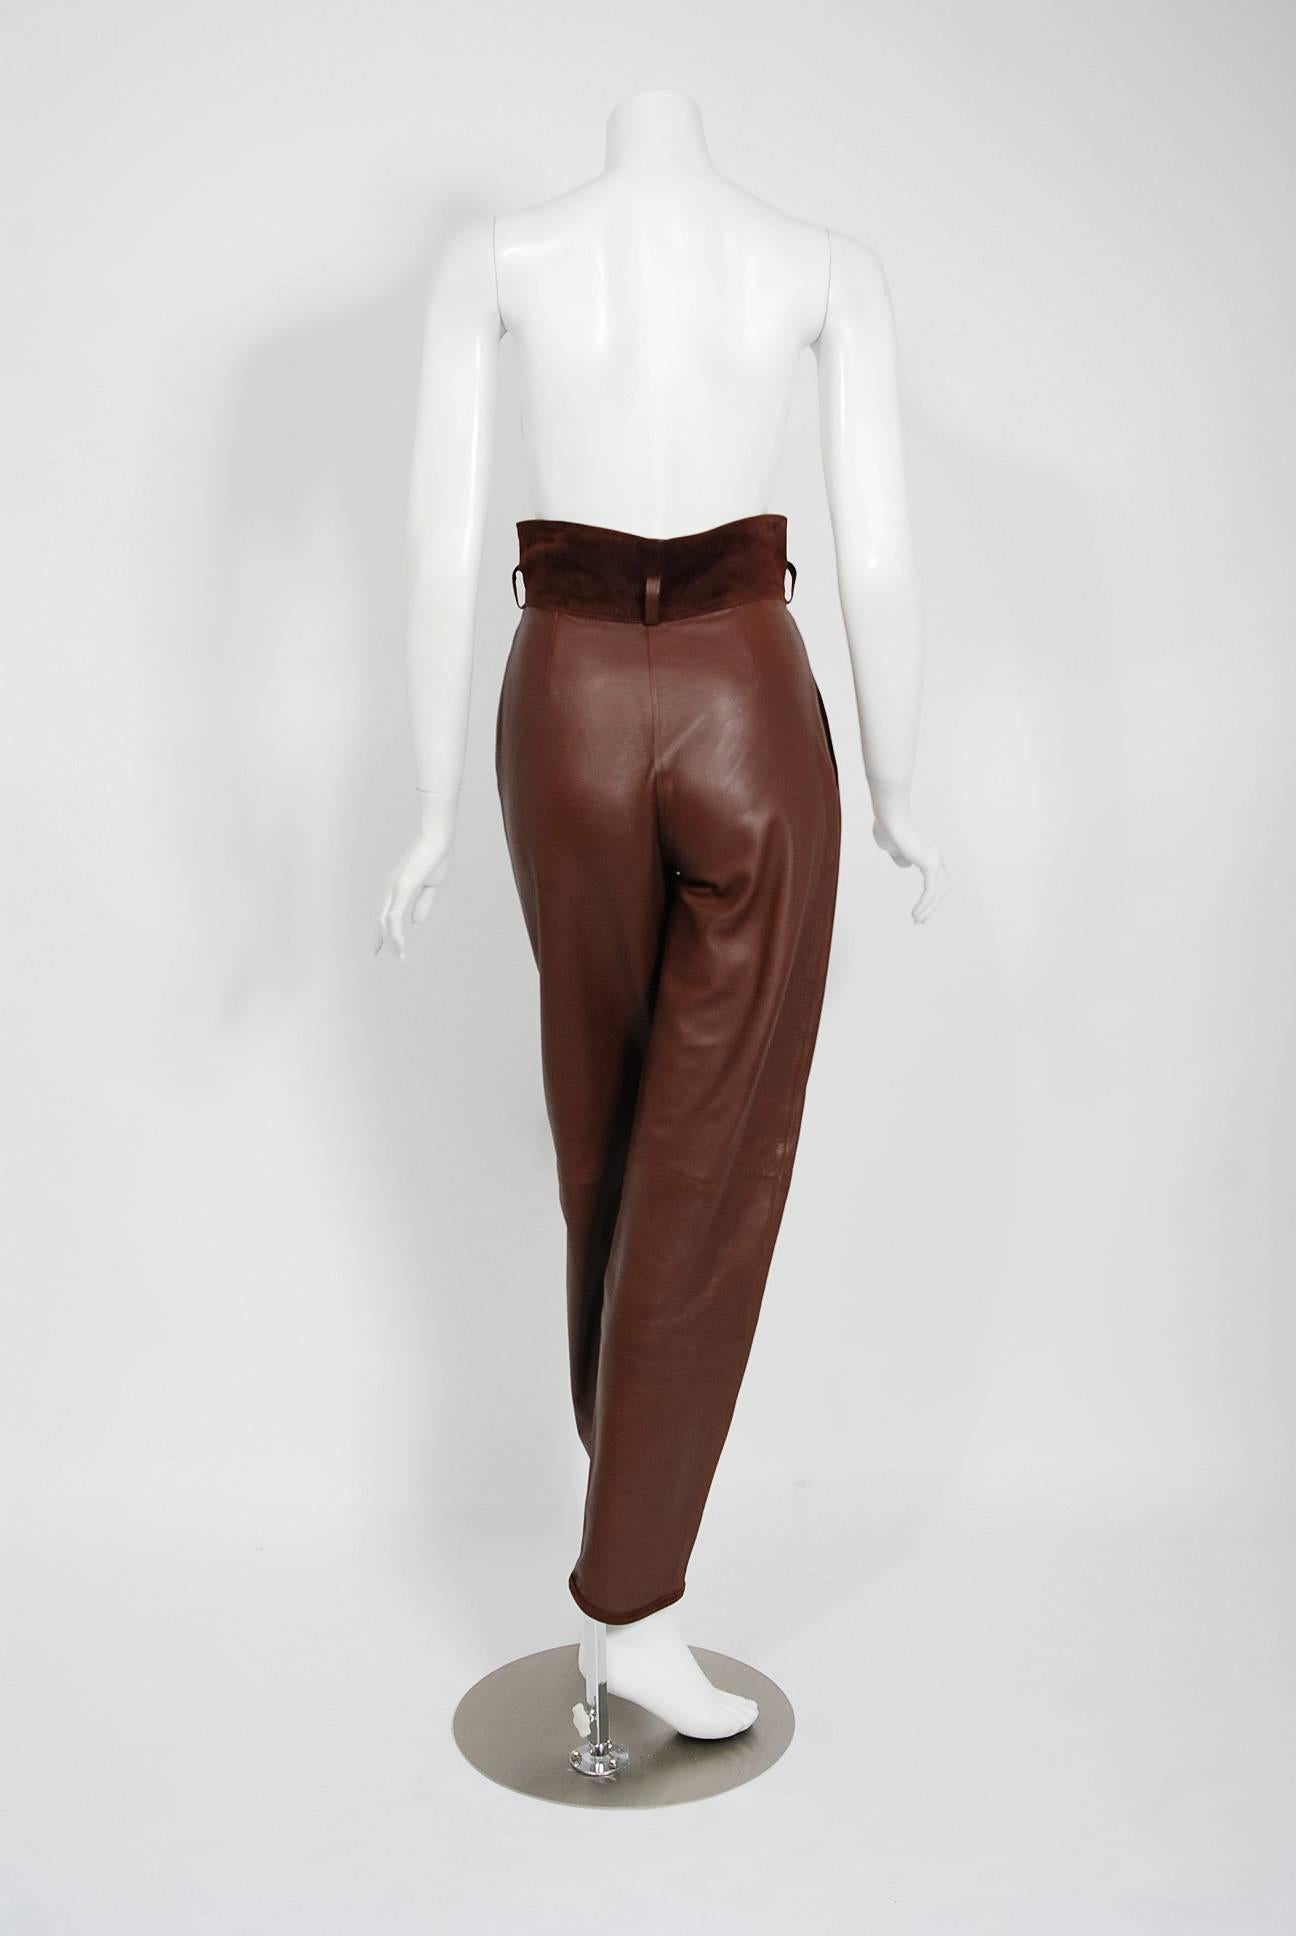 Women's 1984 Gianni Versace Couture Studded Brown Leather Vest and High Waist Pants